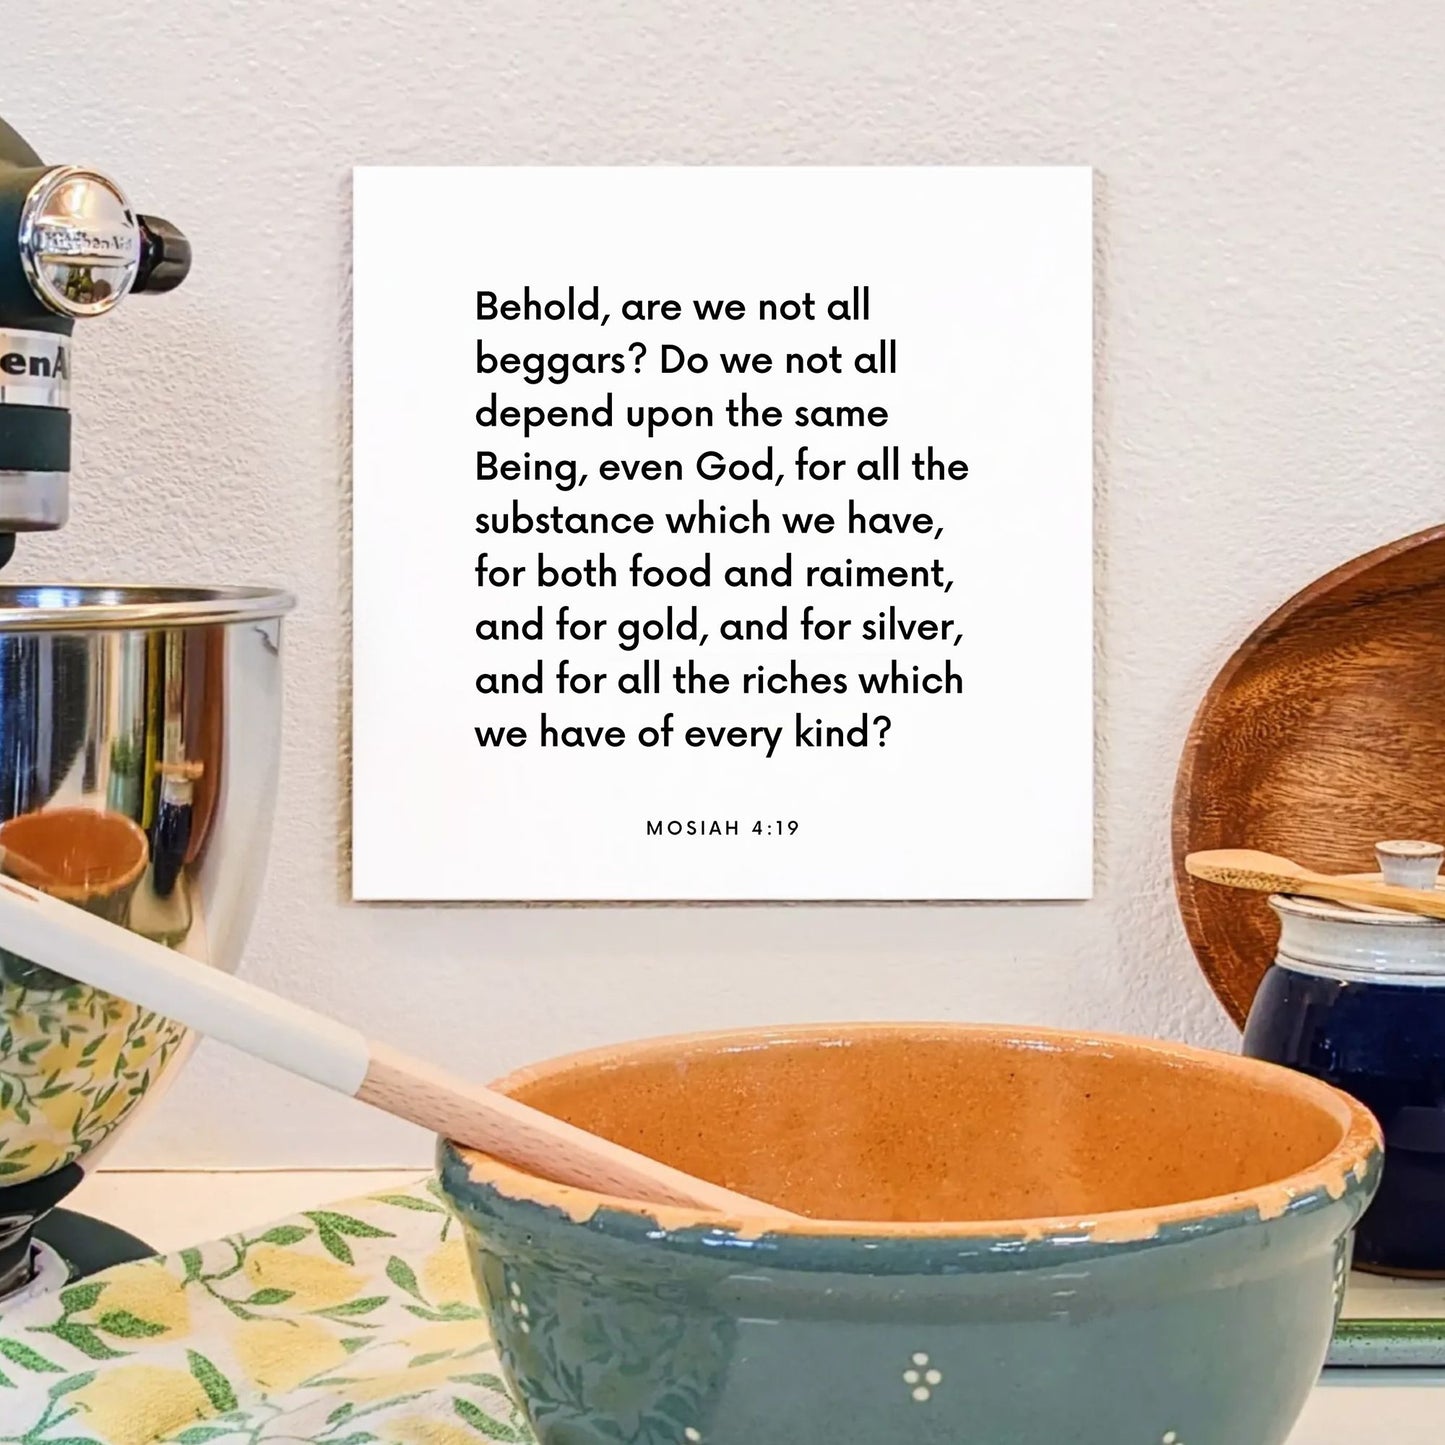 Kitchen mouting of the scripture tile for Mosiah 4:19 - "Behold, are we not all beggars?"